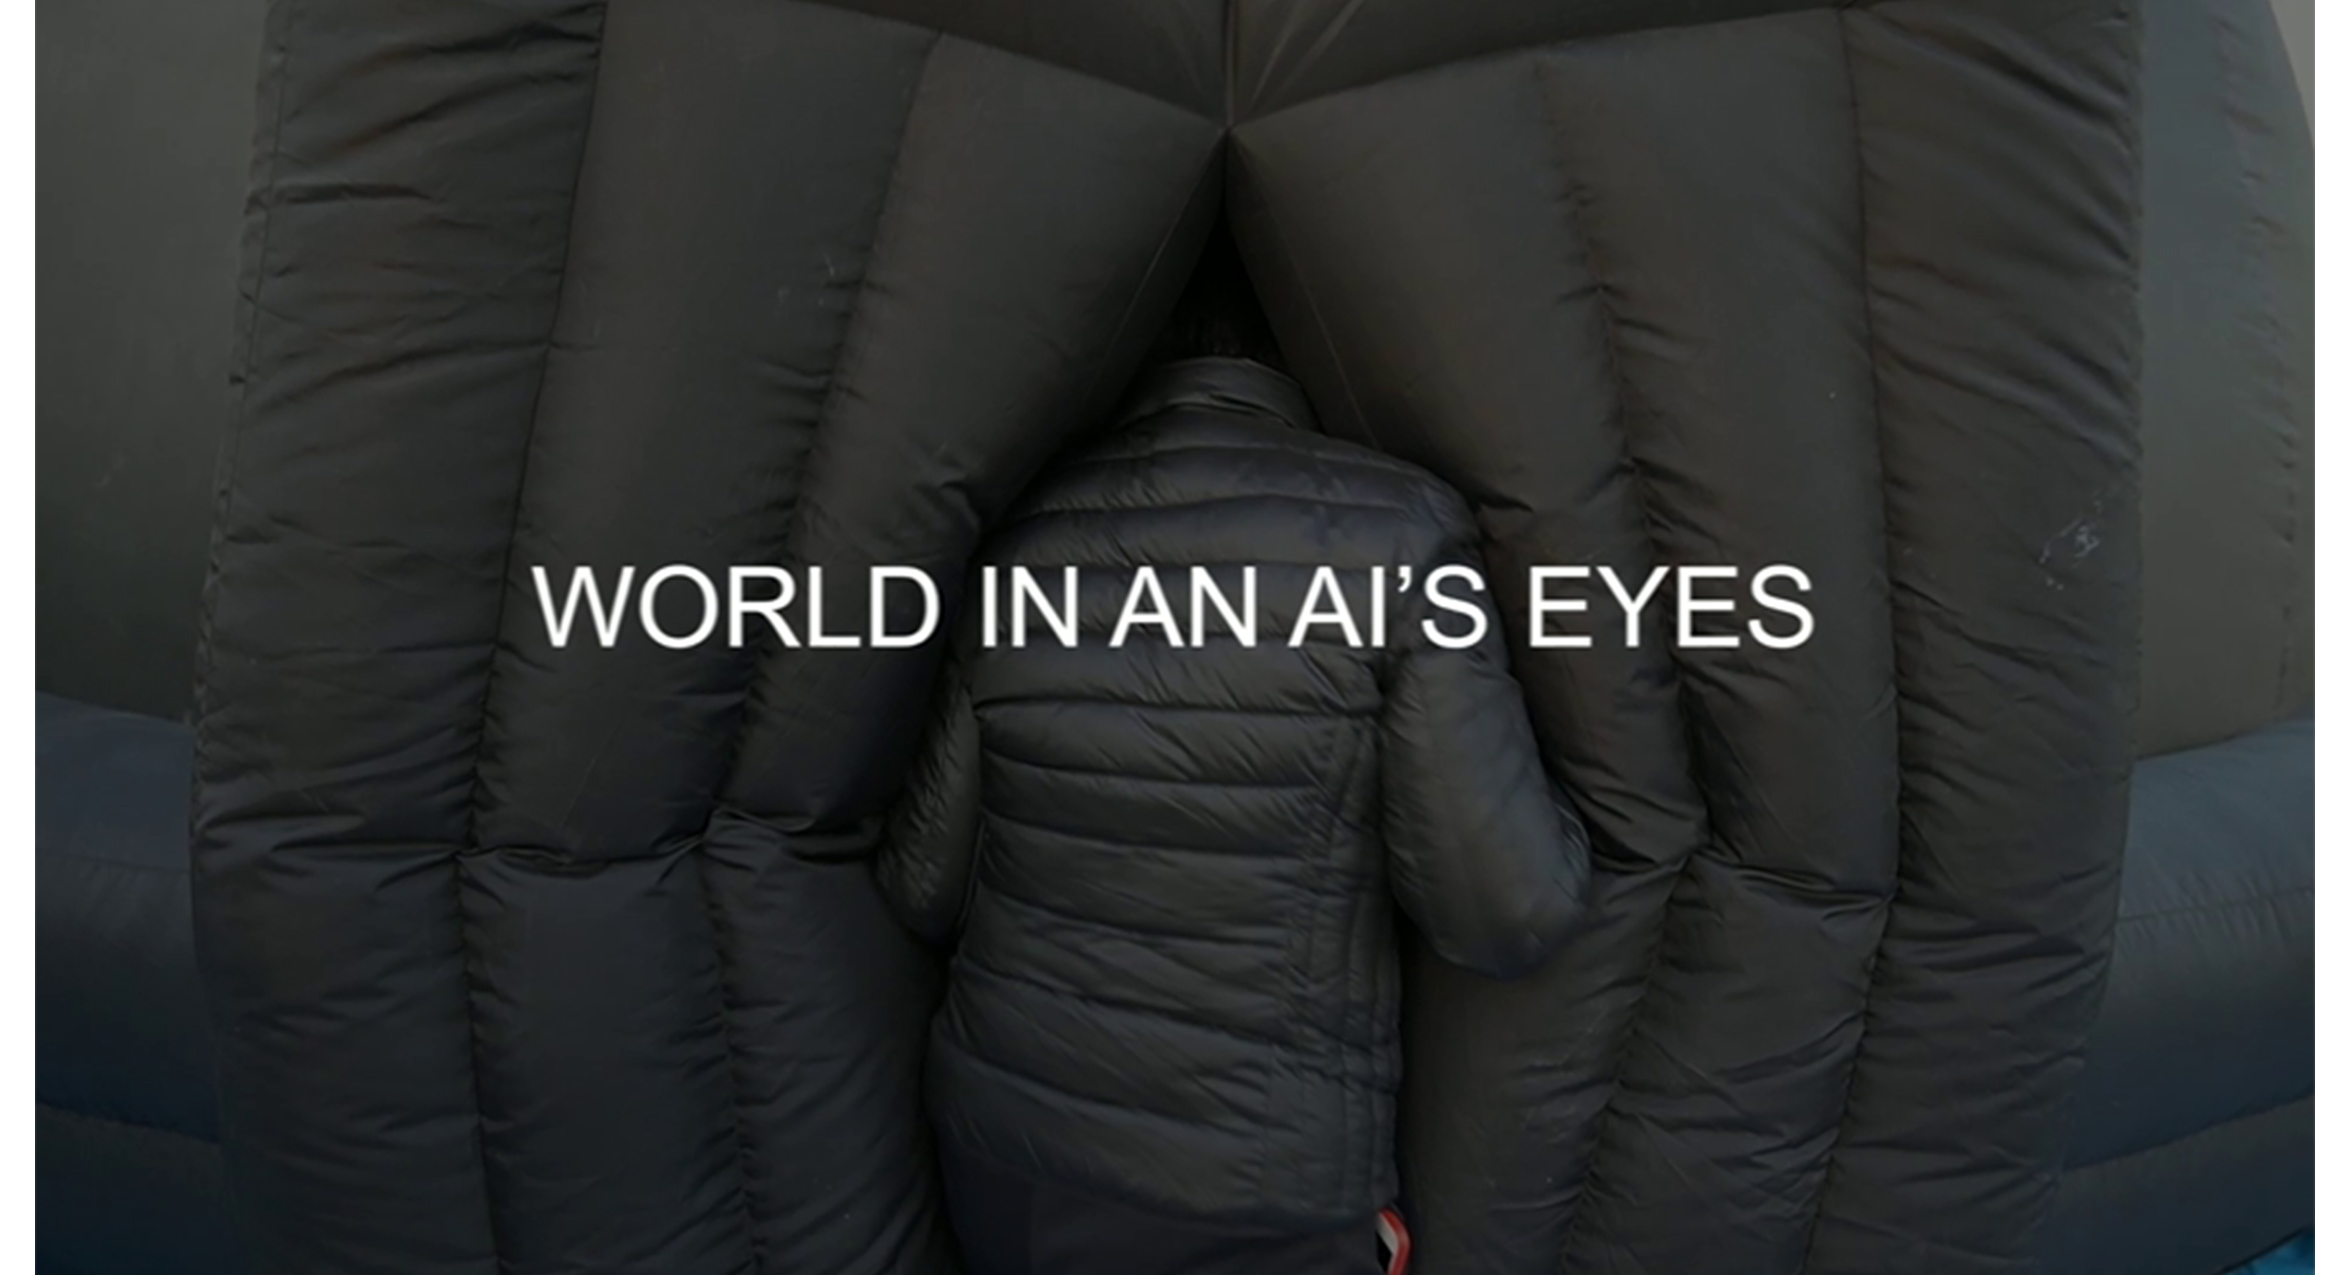 figure wearing black winter coat, seen from behind. white text on screen reads "WORLD IN AN AI'S EYES"